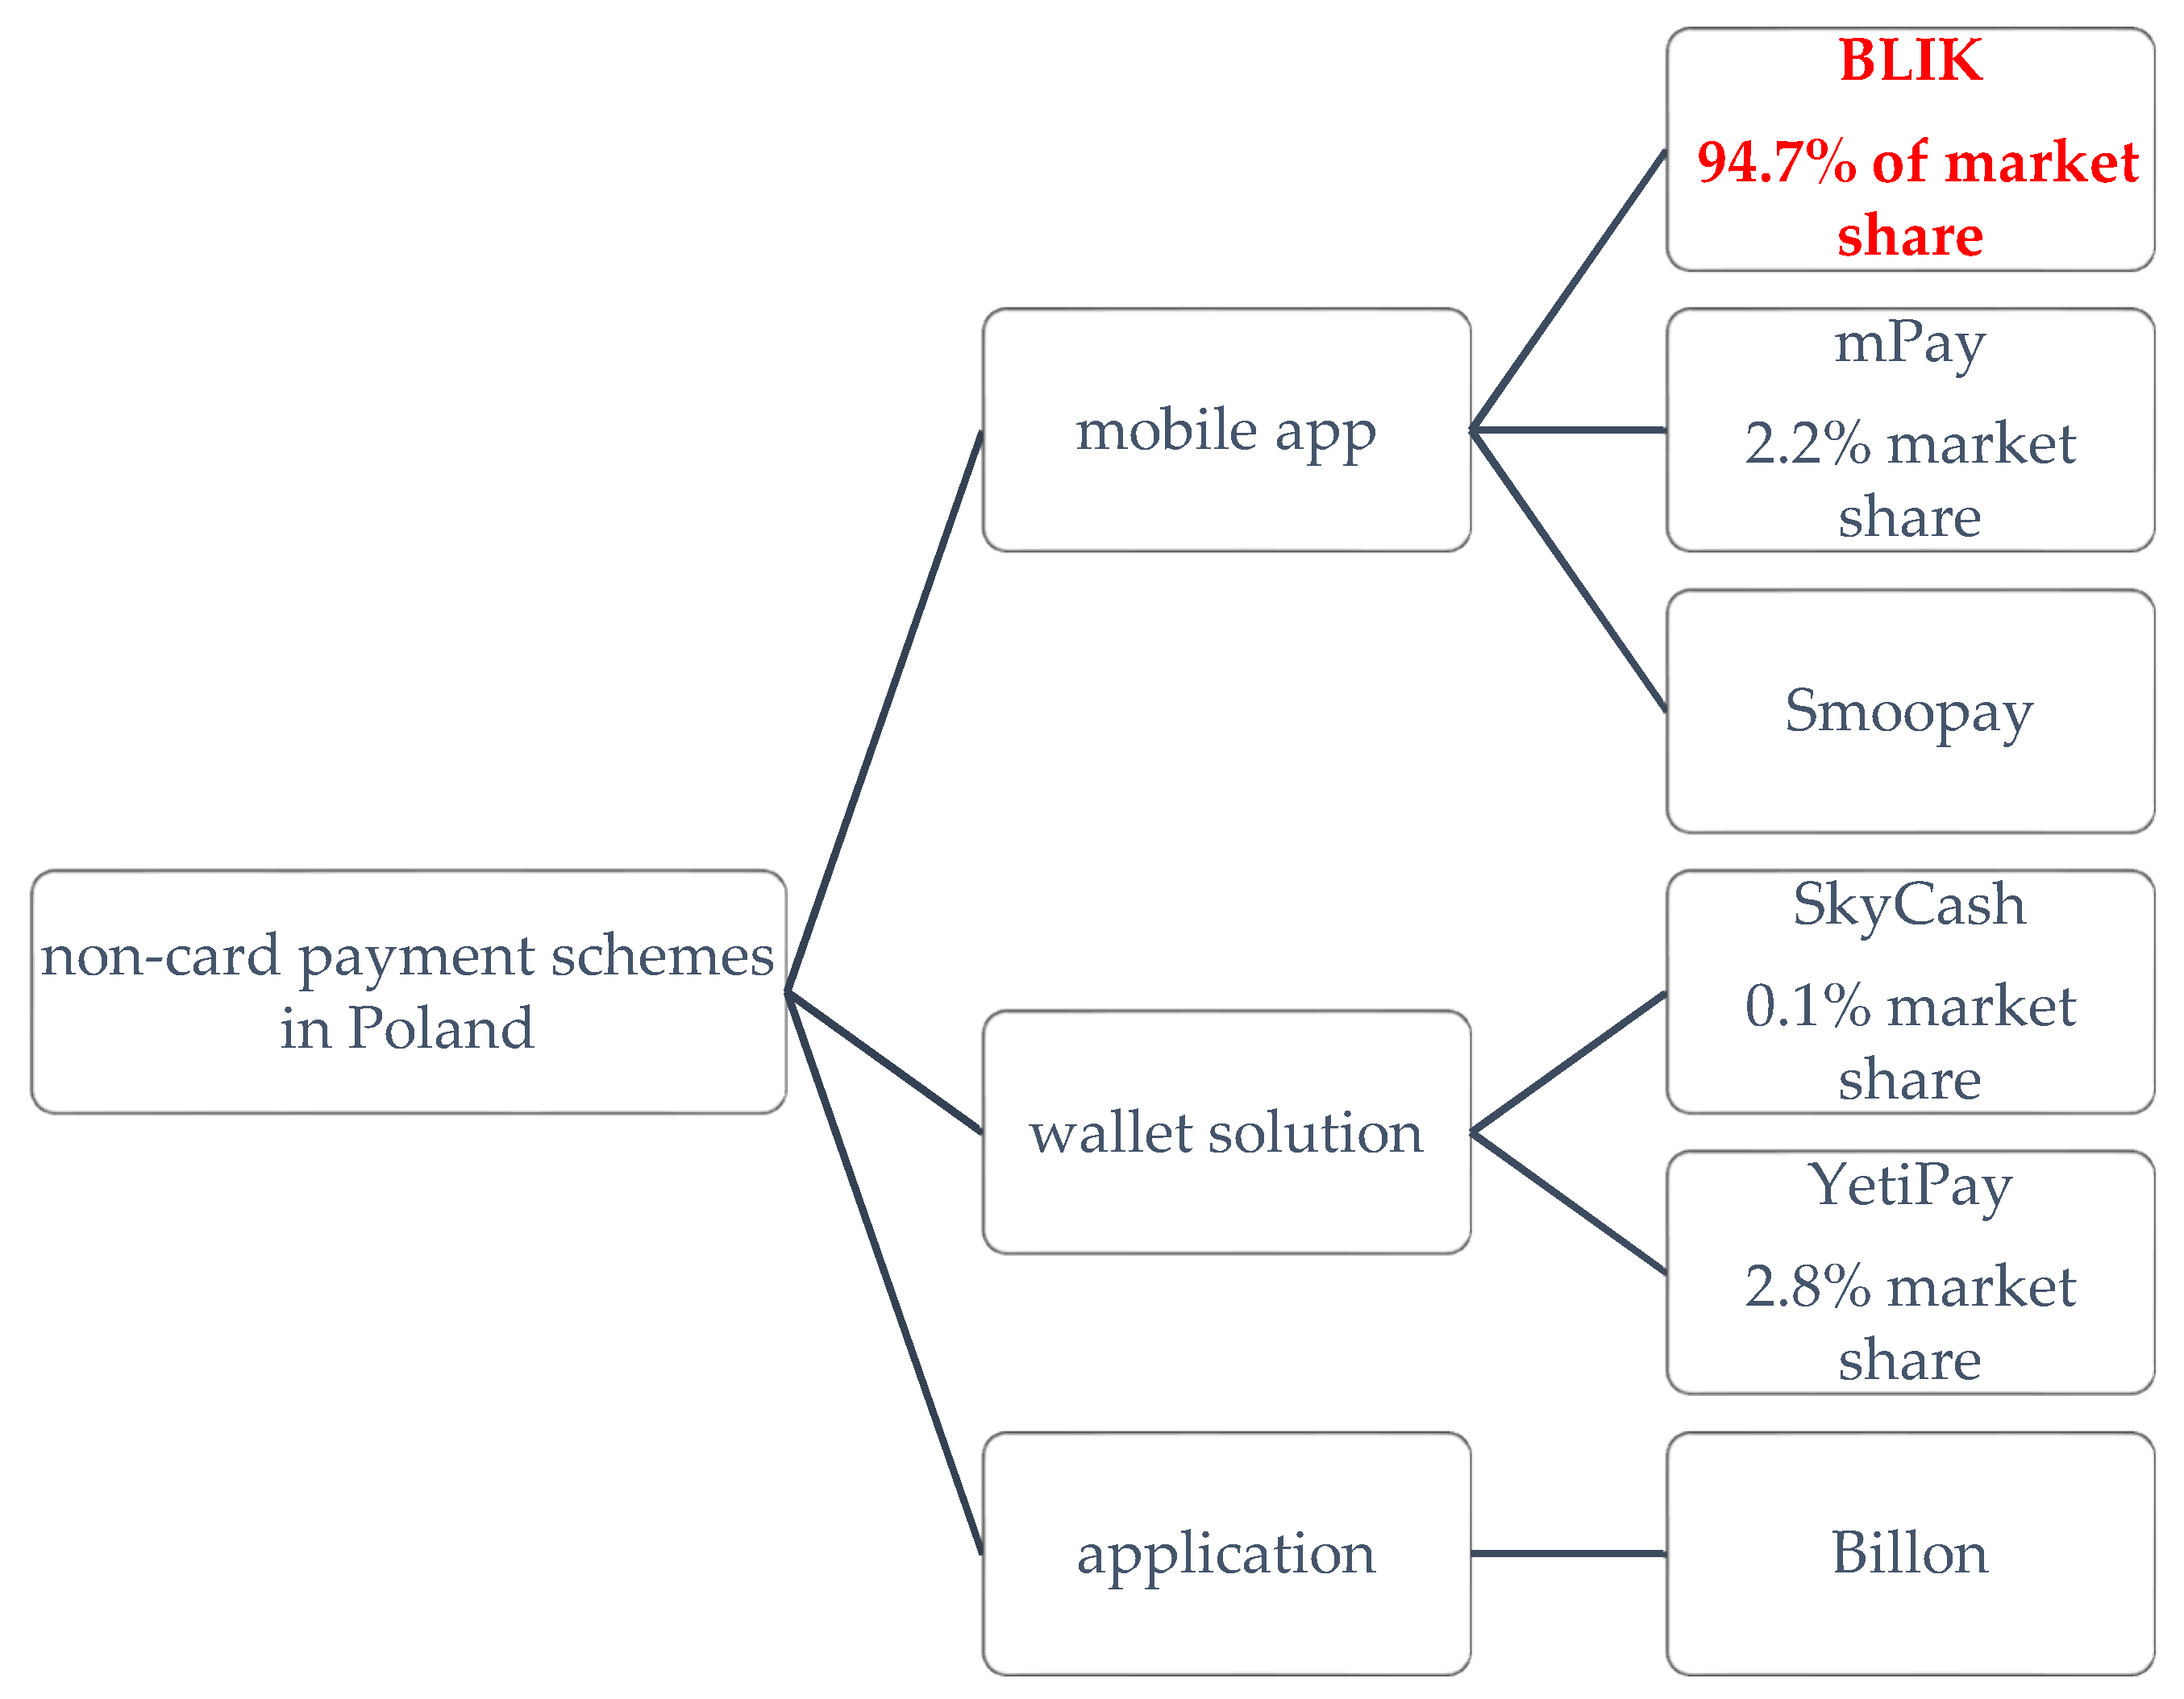 JRFM | Free Full-Text | The Determinants of PayTech's Success in the Mobile  Payment Market—The Case of BLIK | HTML